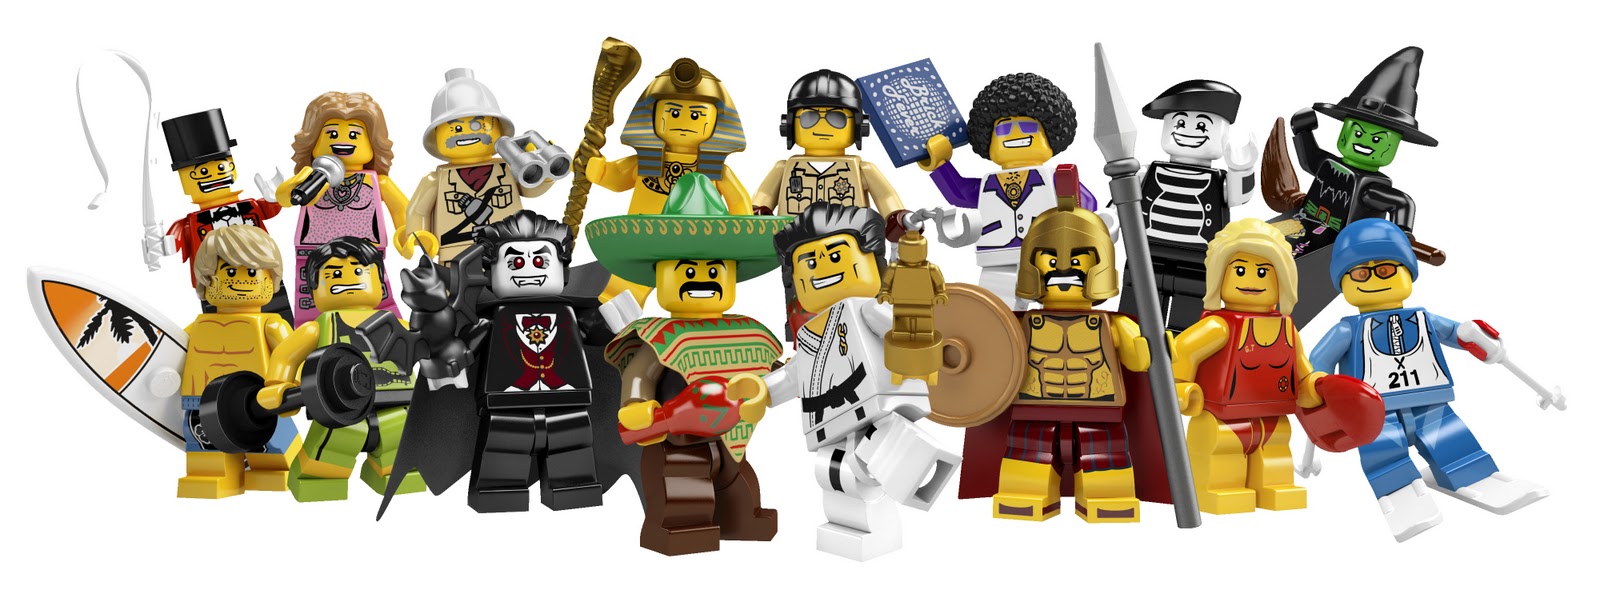 lego minifigures game download free